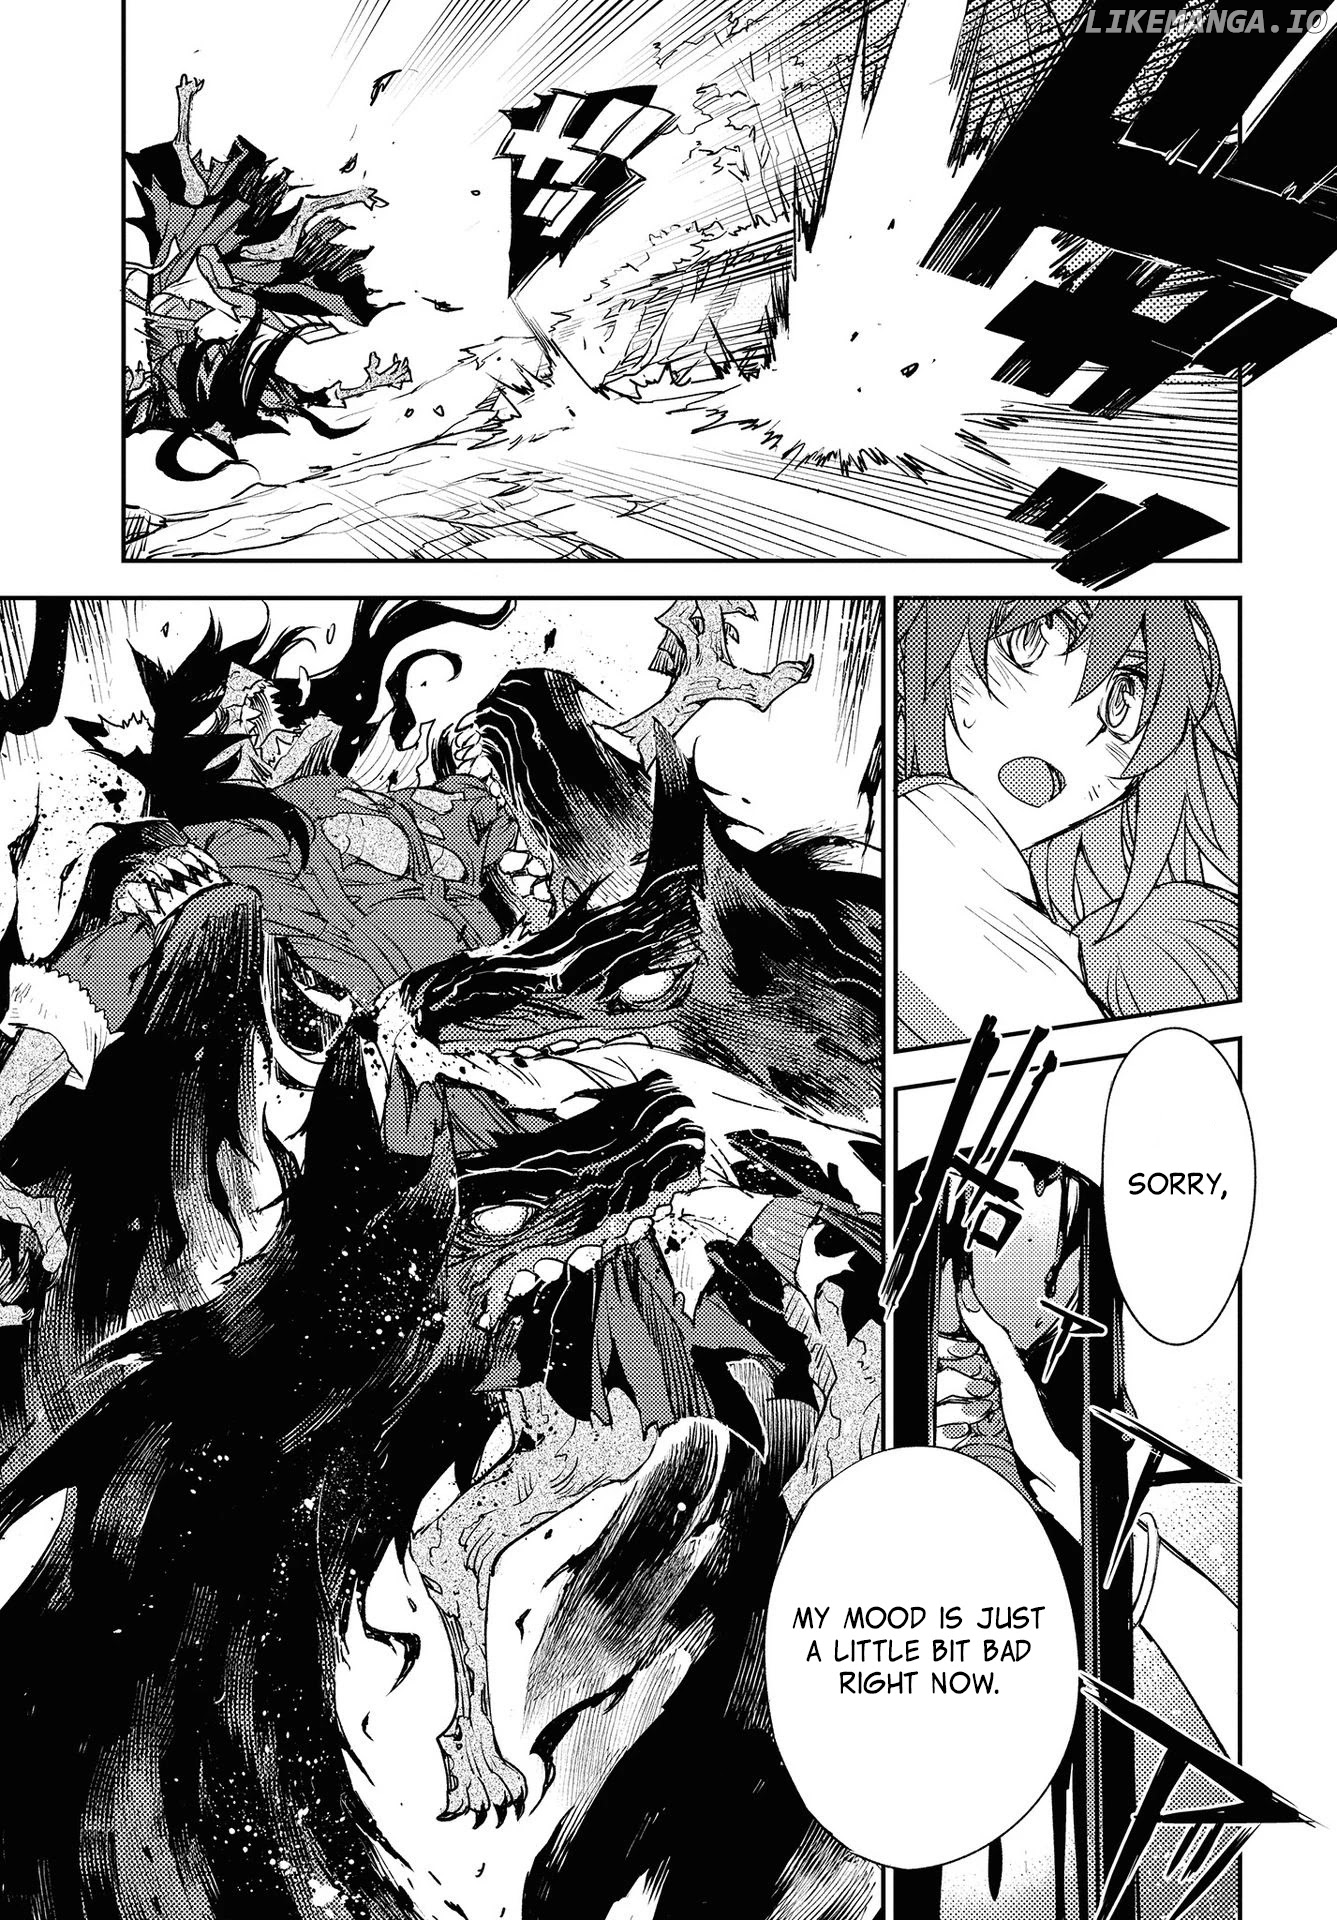 Fate/Grand Order: Epic of Remnant - Subspecies Singularity IV: Taboo Advent Salem: Salem of Heresy chapter 17 - page 14